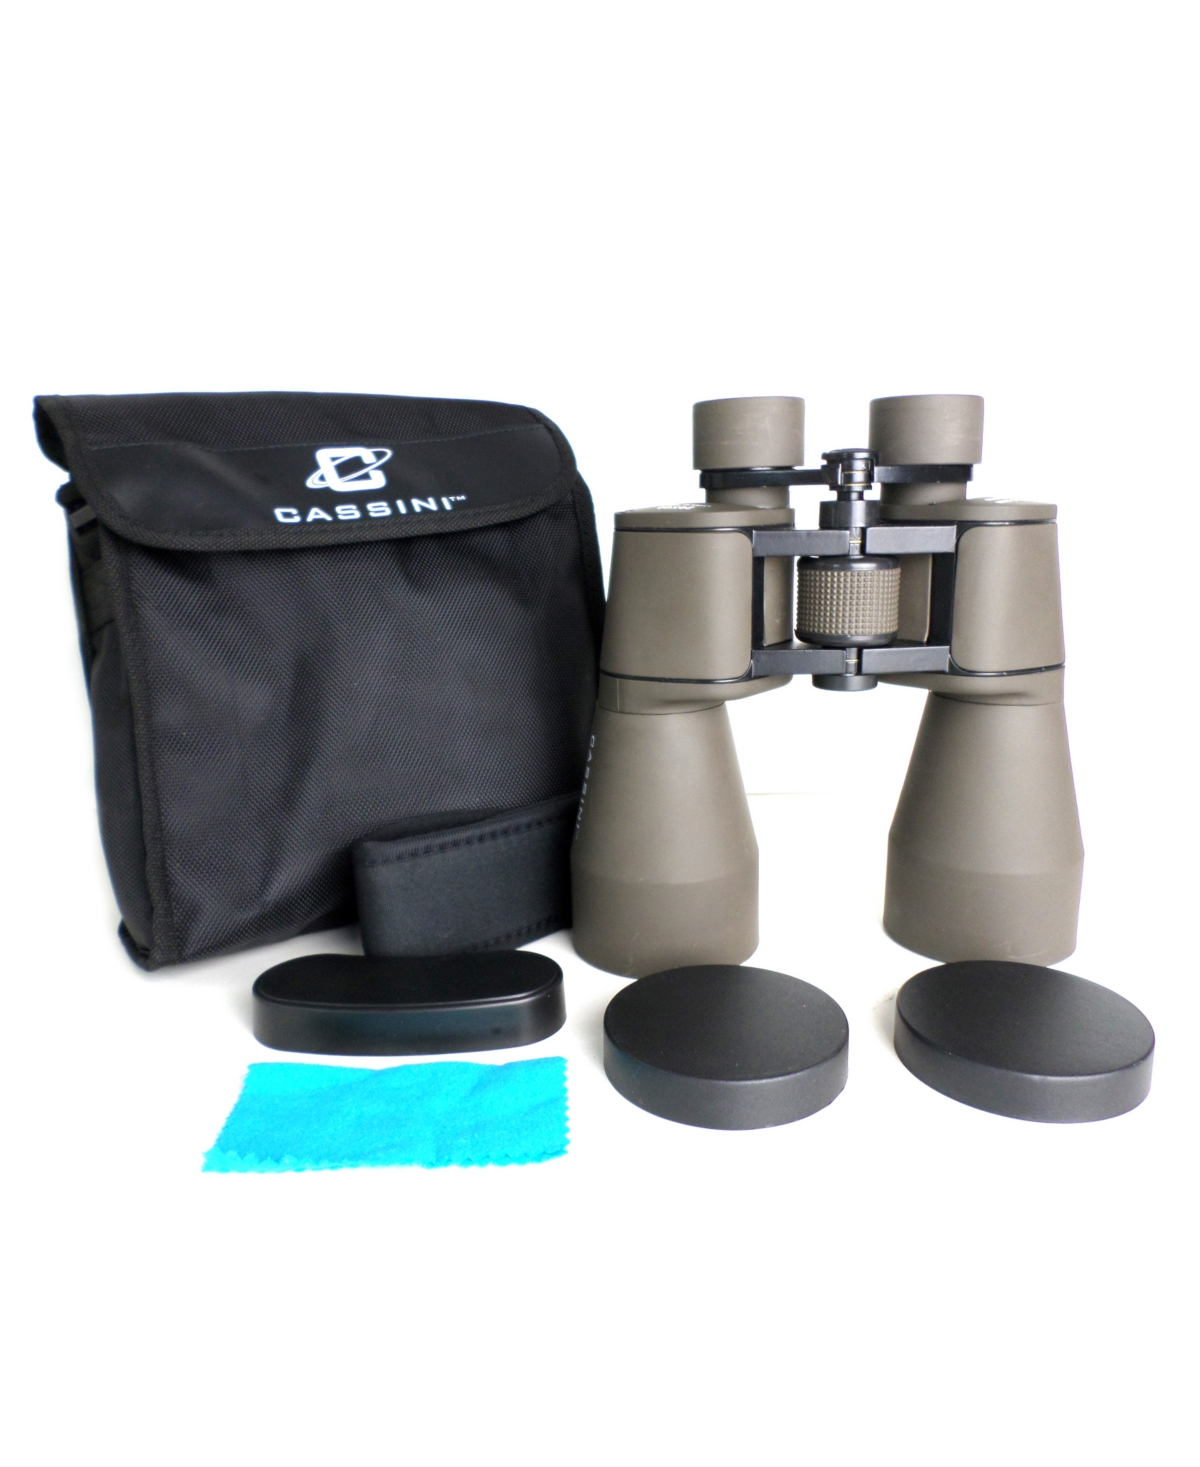 Shop Cassini 20 X 60mm Binocular With Tripod Socket, Fold Down Eye Guards And Case In Charcoal